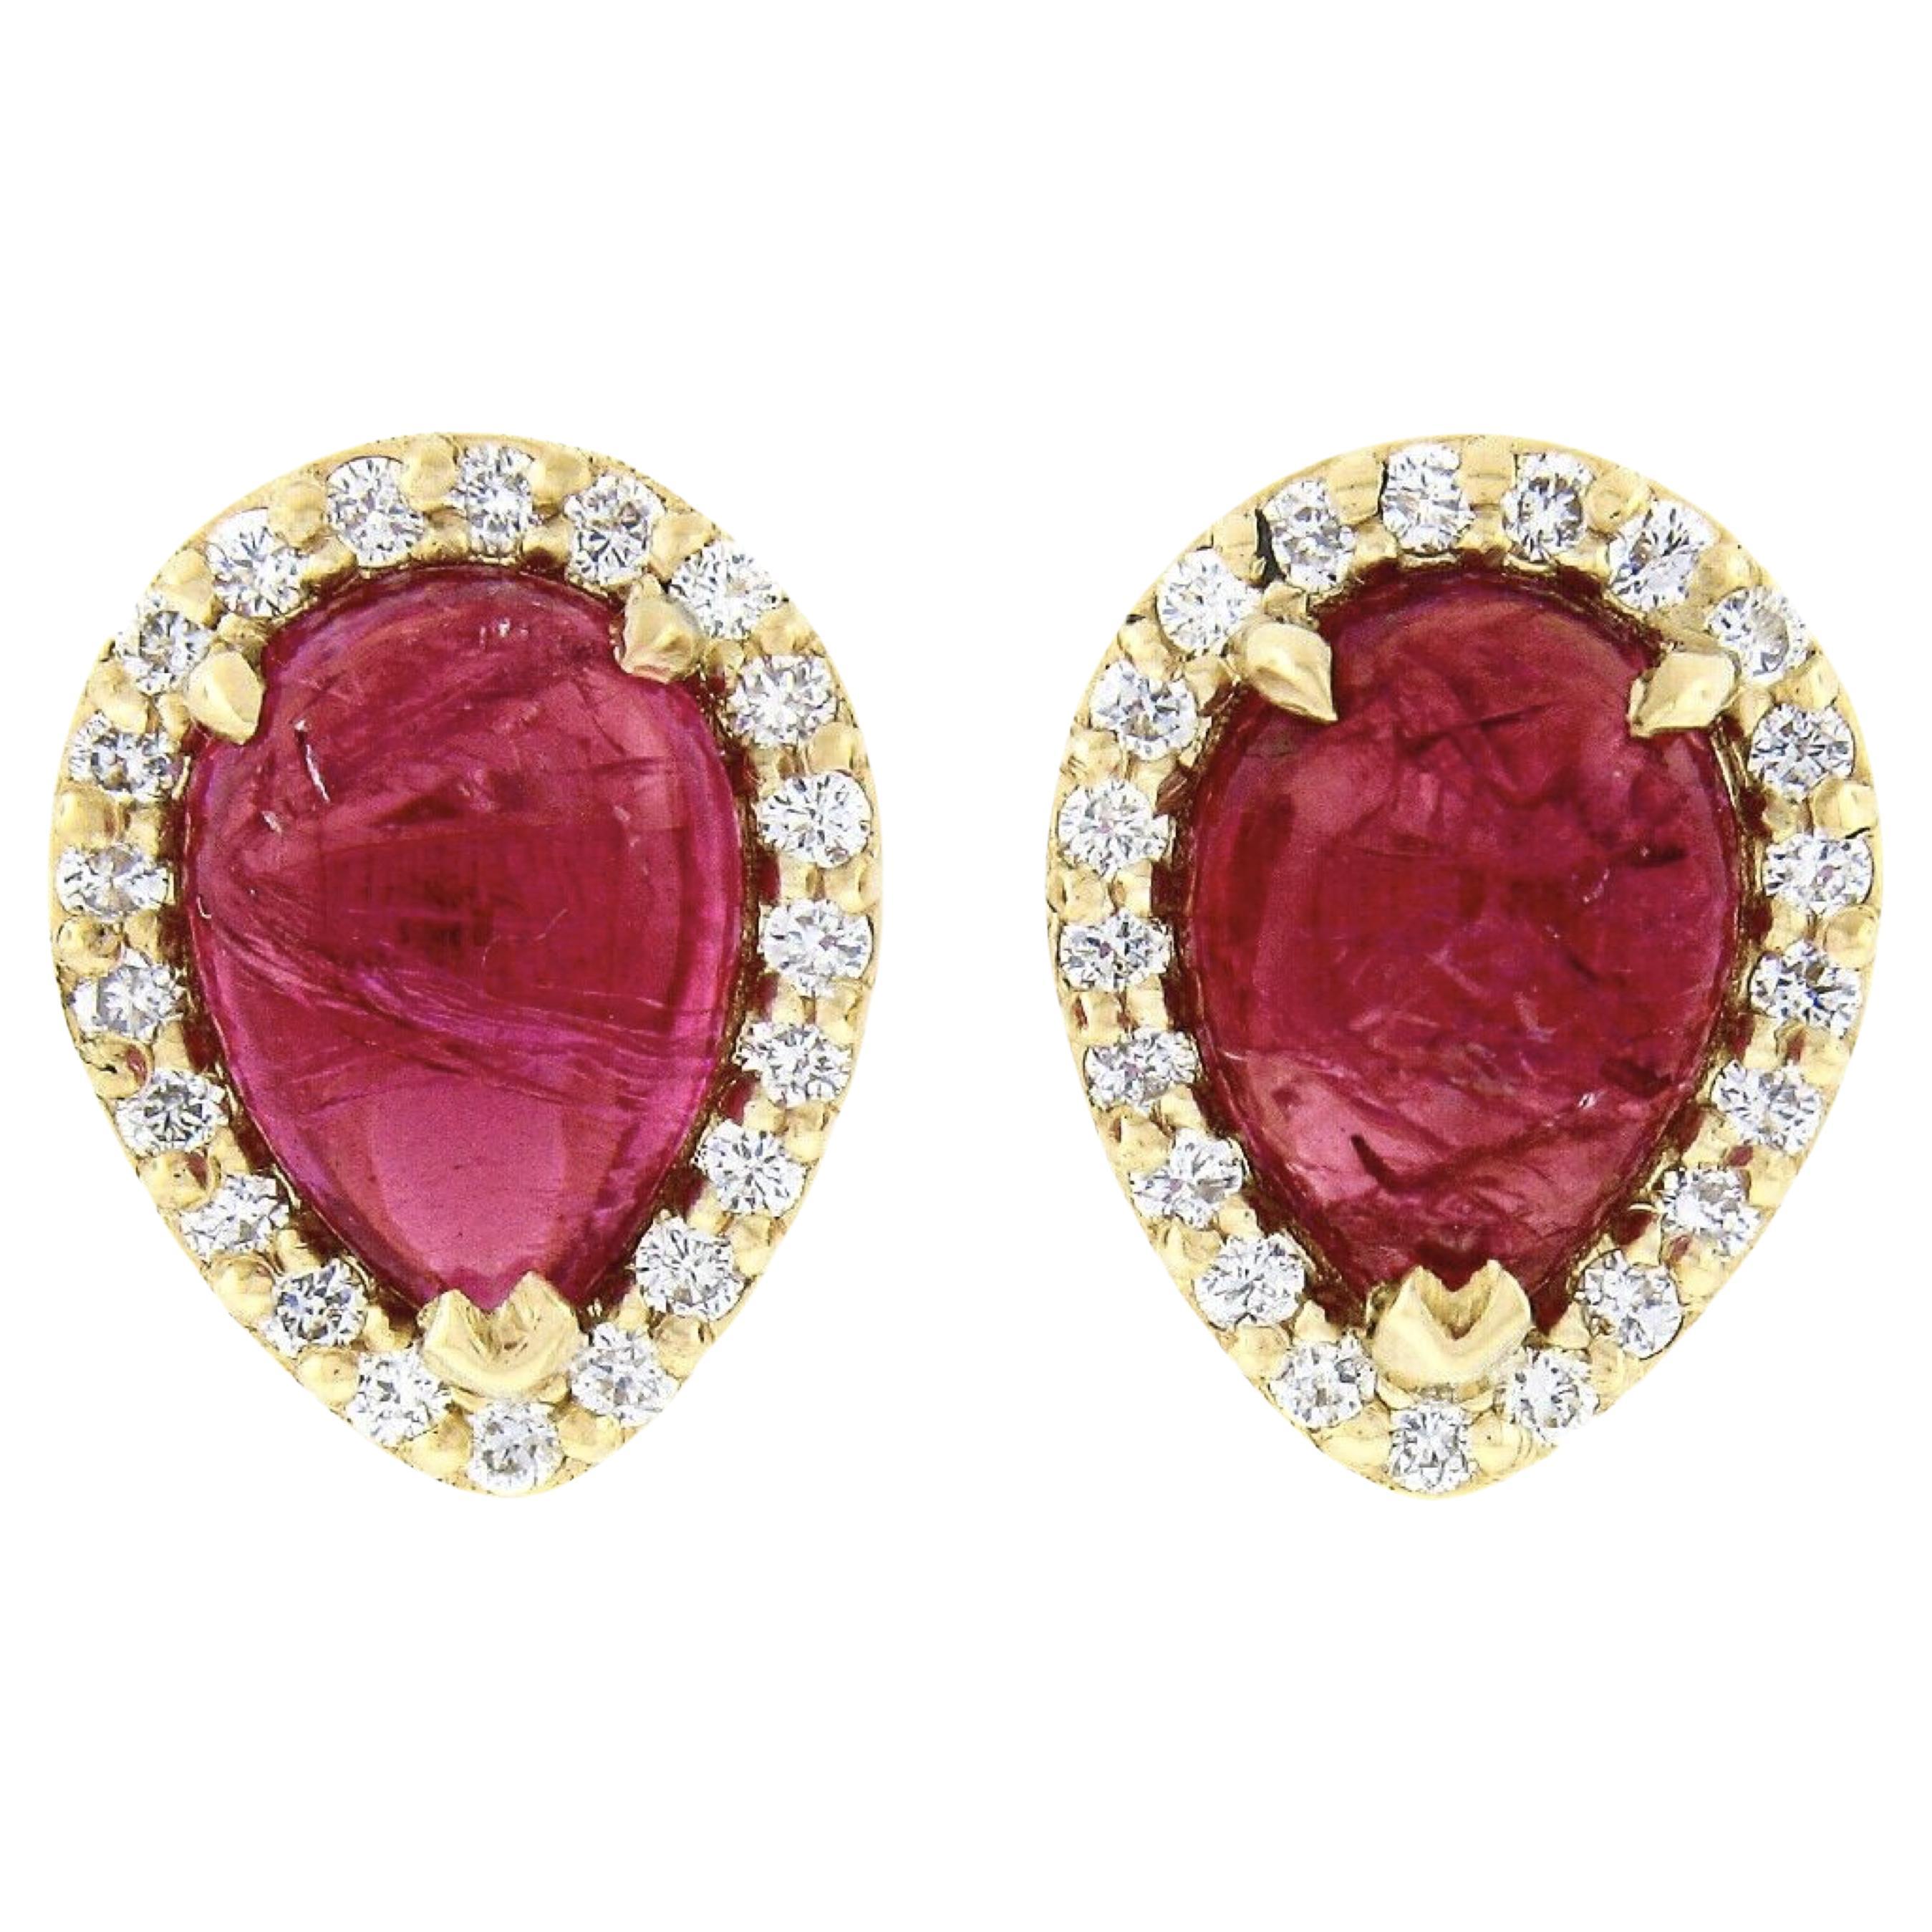 New 14K Yellow Gold 2.98ct Pear Cabochon Ruby W/ Pave Diamond Halo Stud Earrings